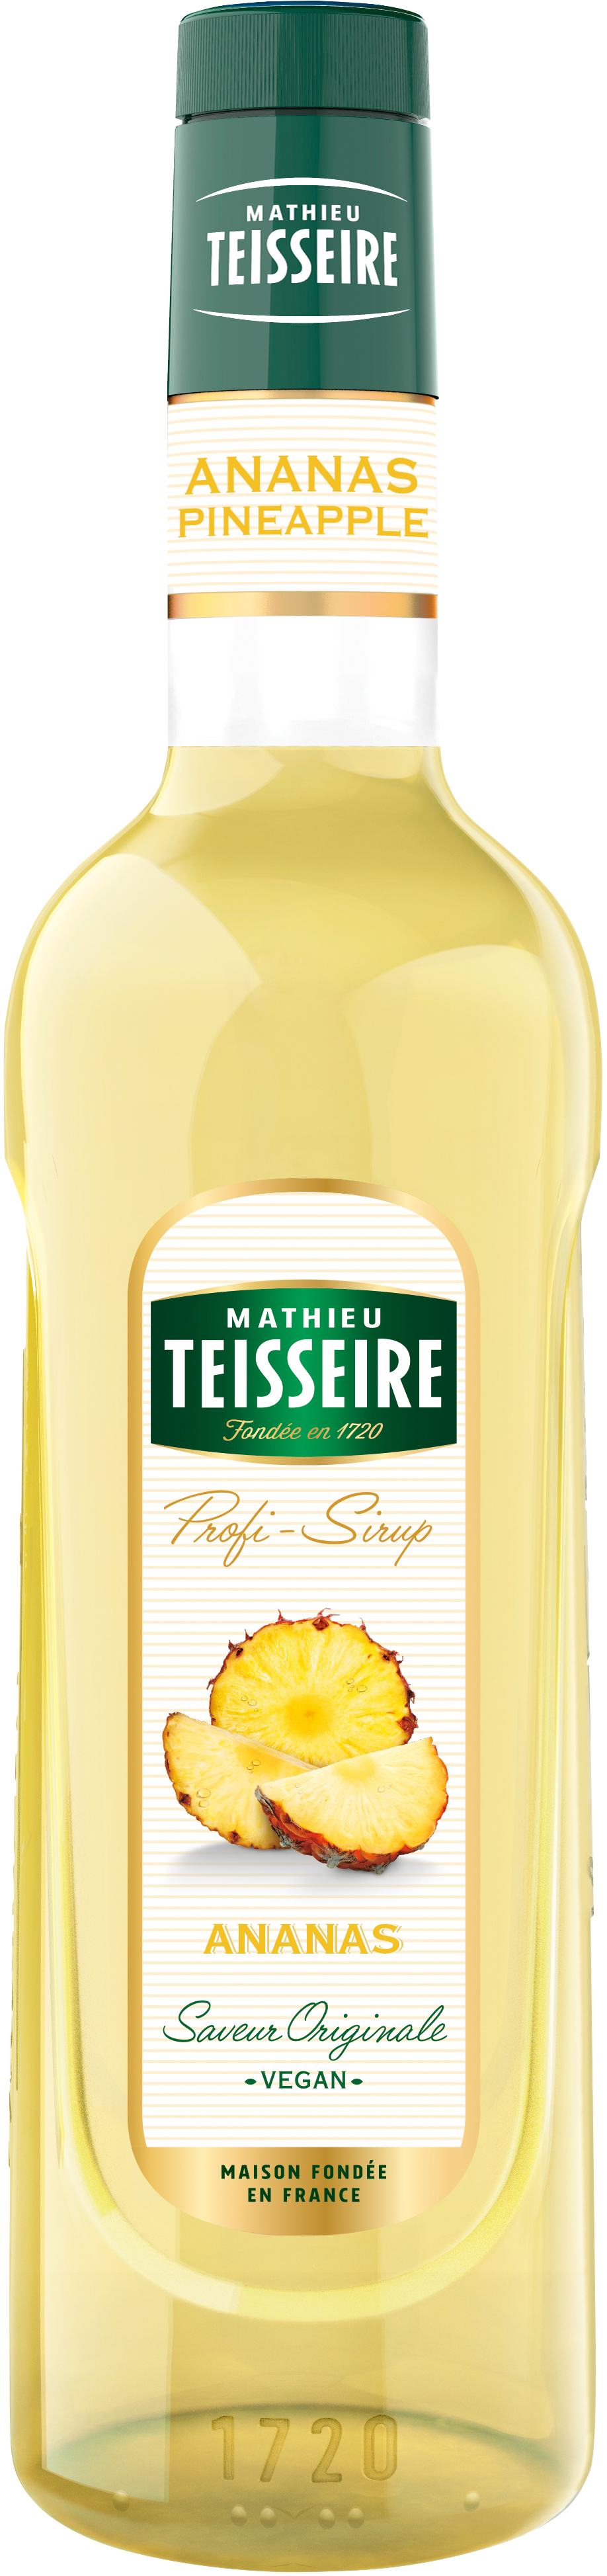 Teisseire Ananas Sirup - 0,7L